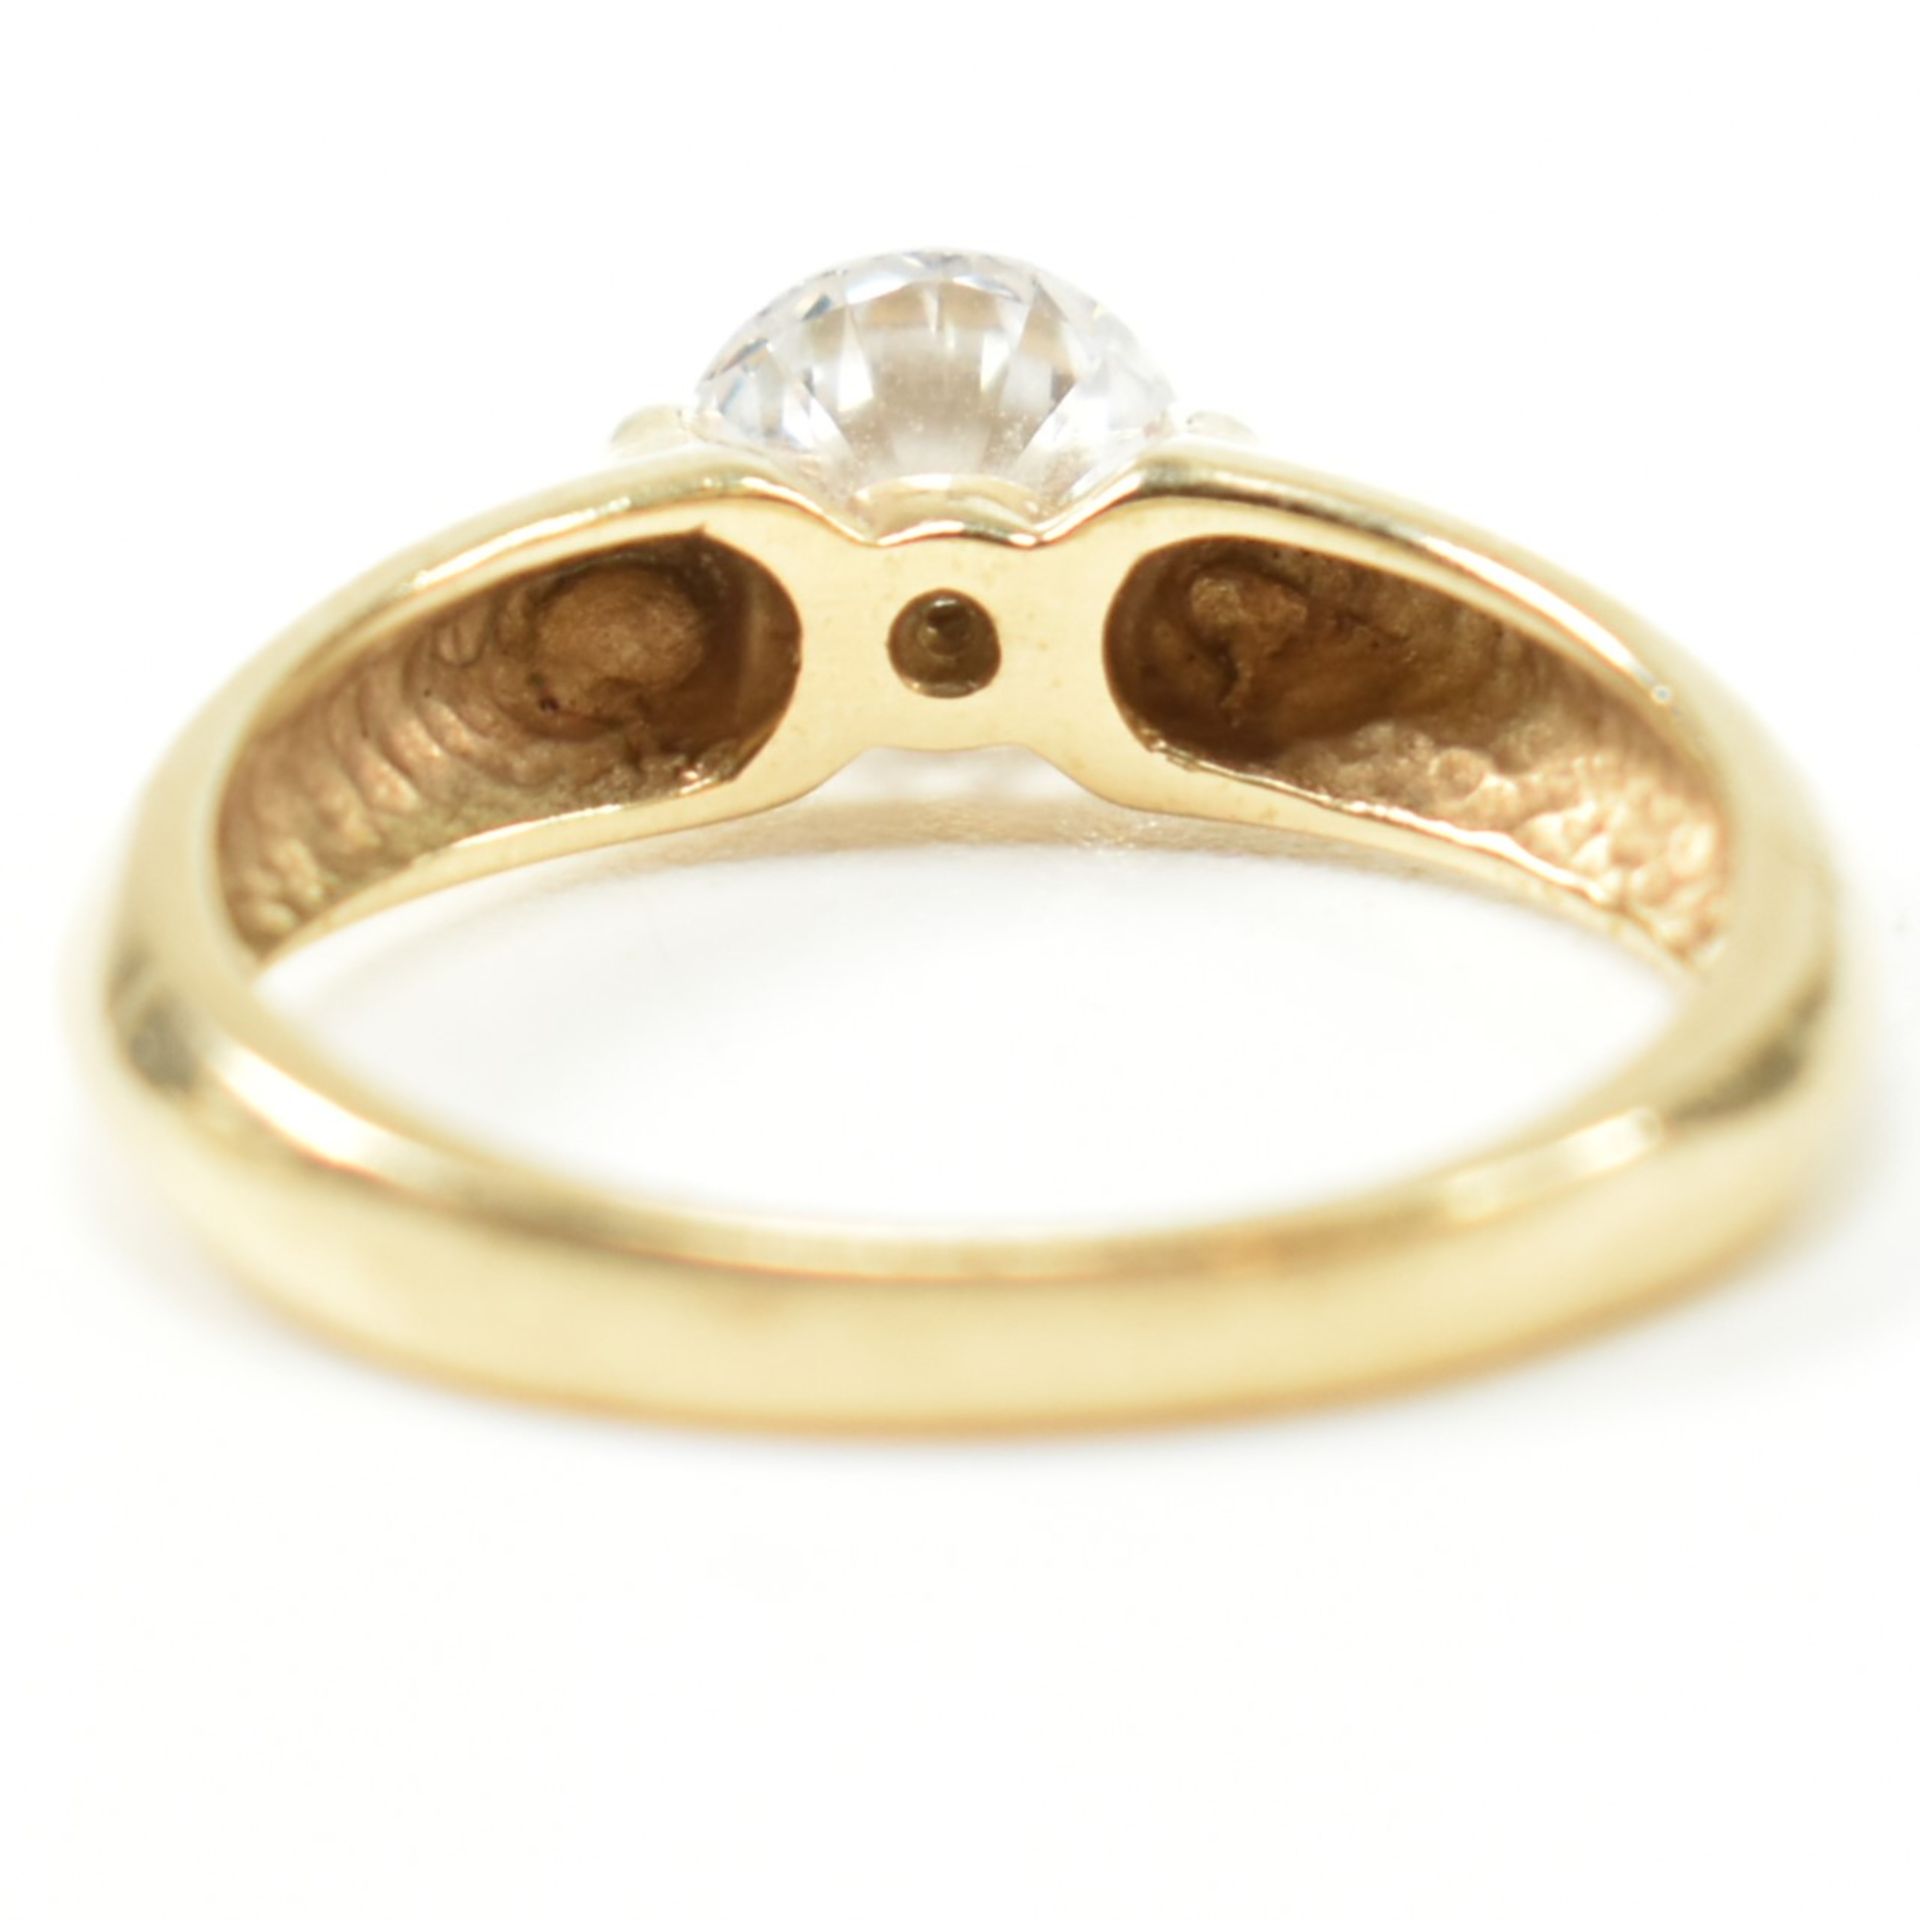 HALLMARKED 14CT GOLD & CZ SOLITAIRE RING - Image 7 of 11